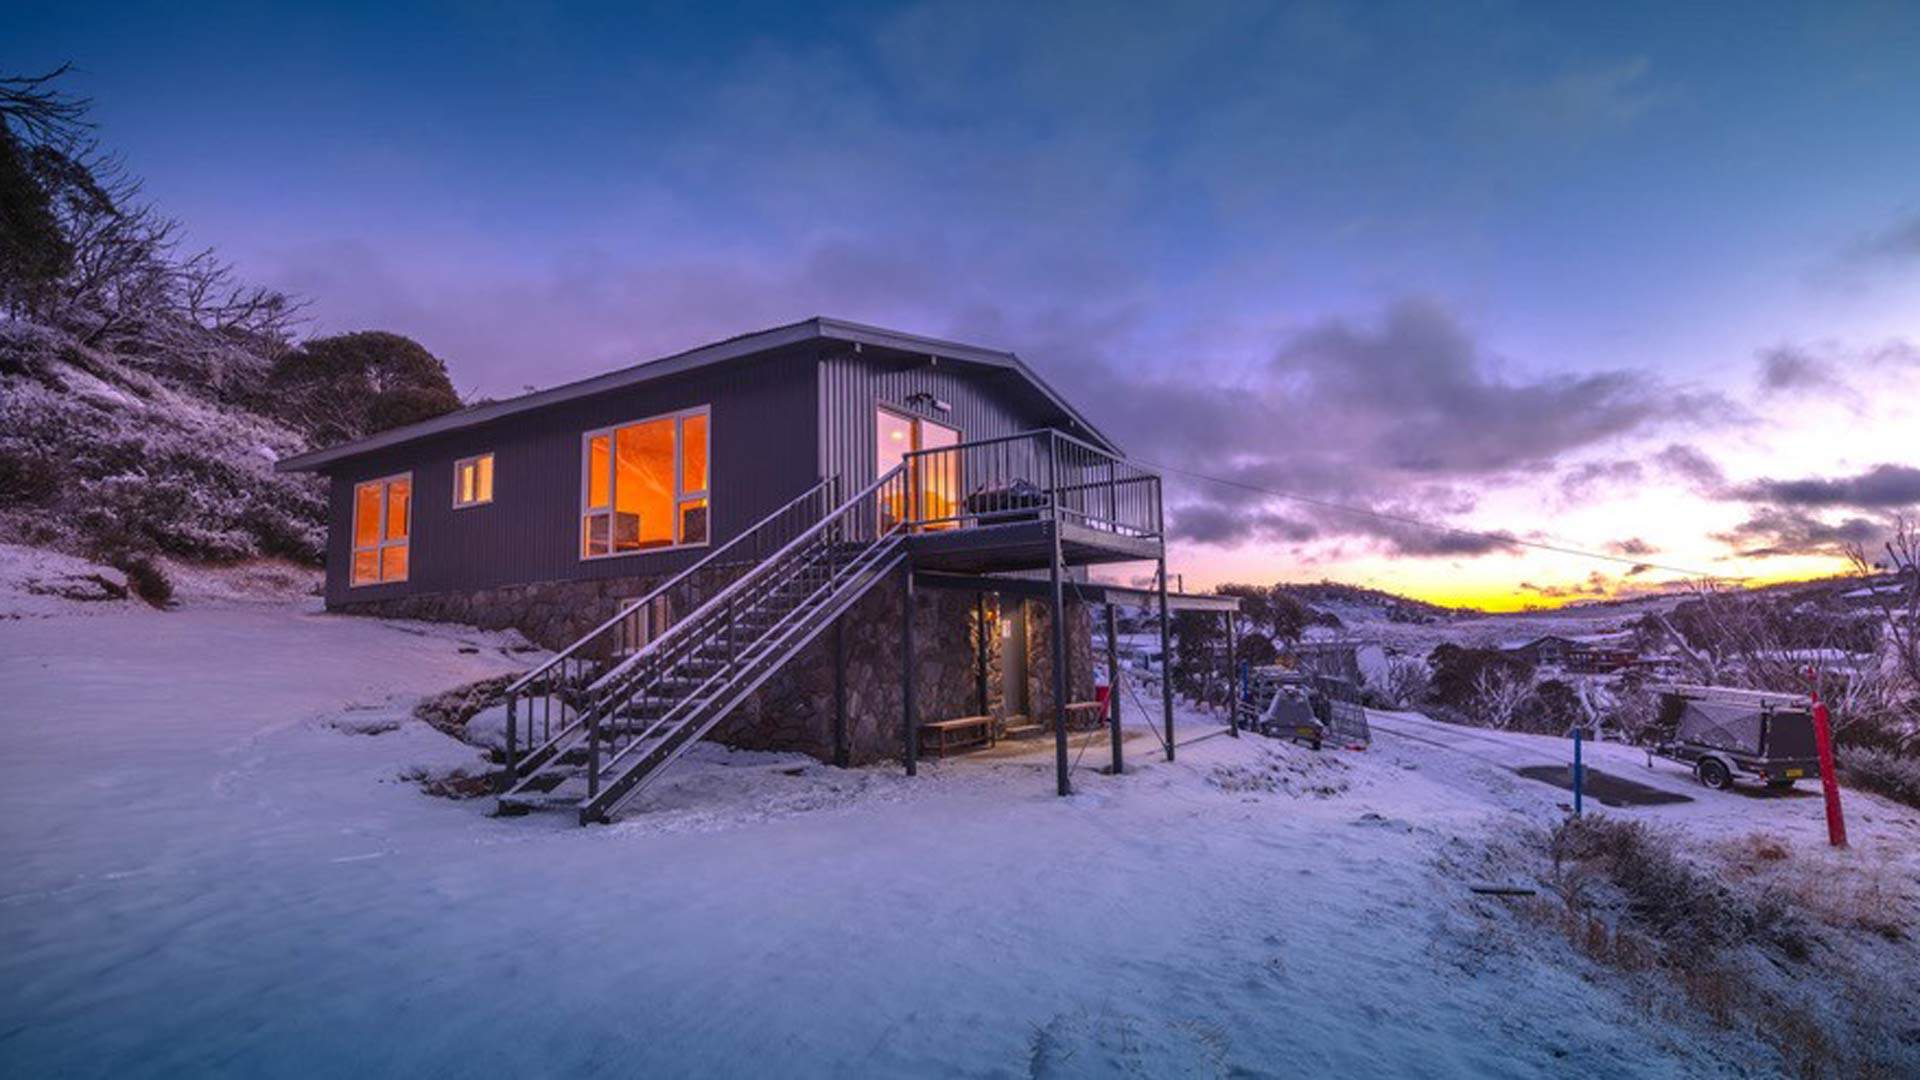 You Can Now Stay In This Secluded Ski-In Ski-Out Lodge in NSW